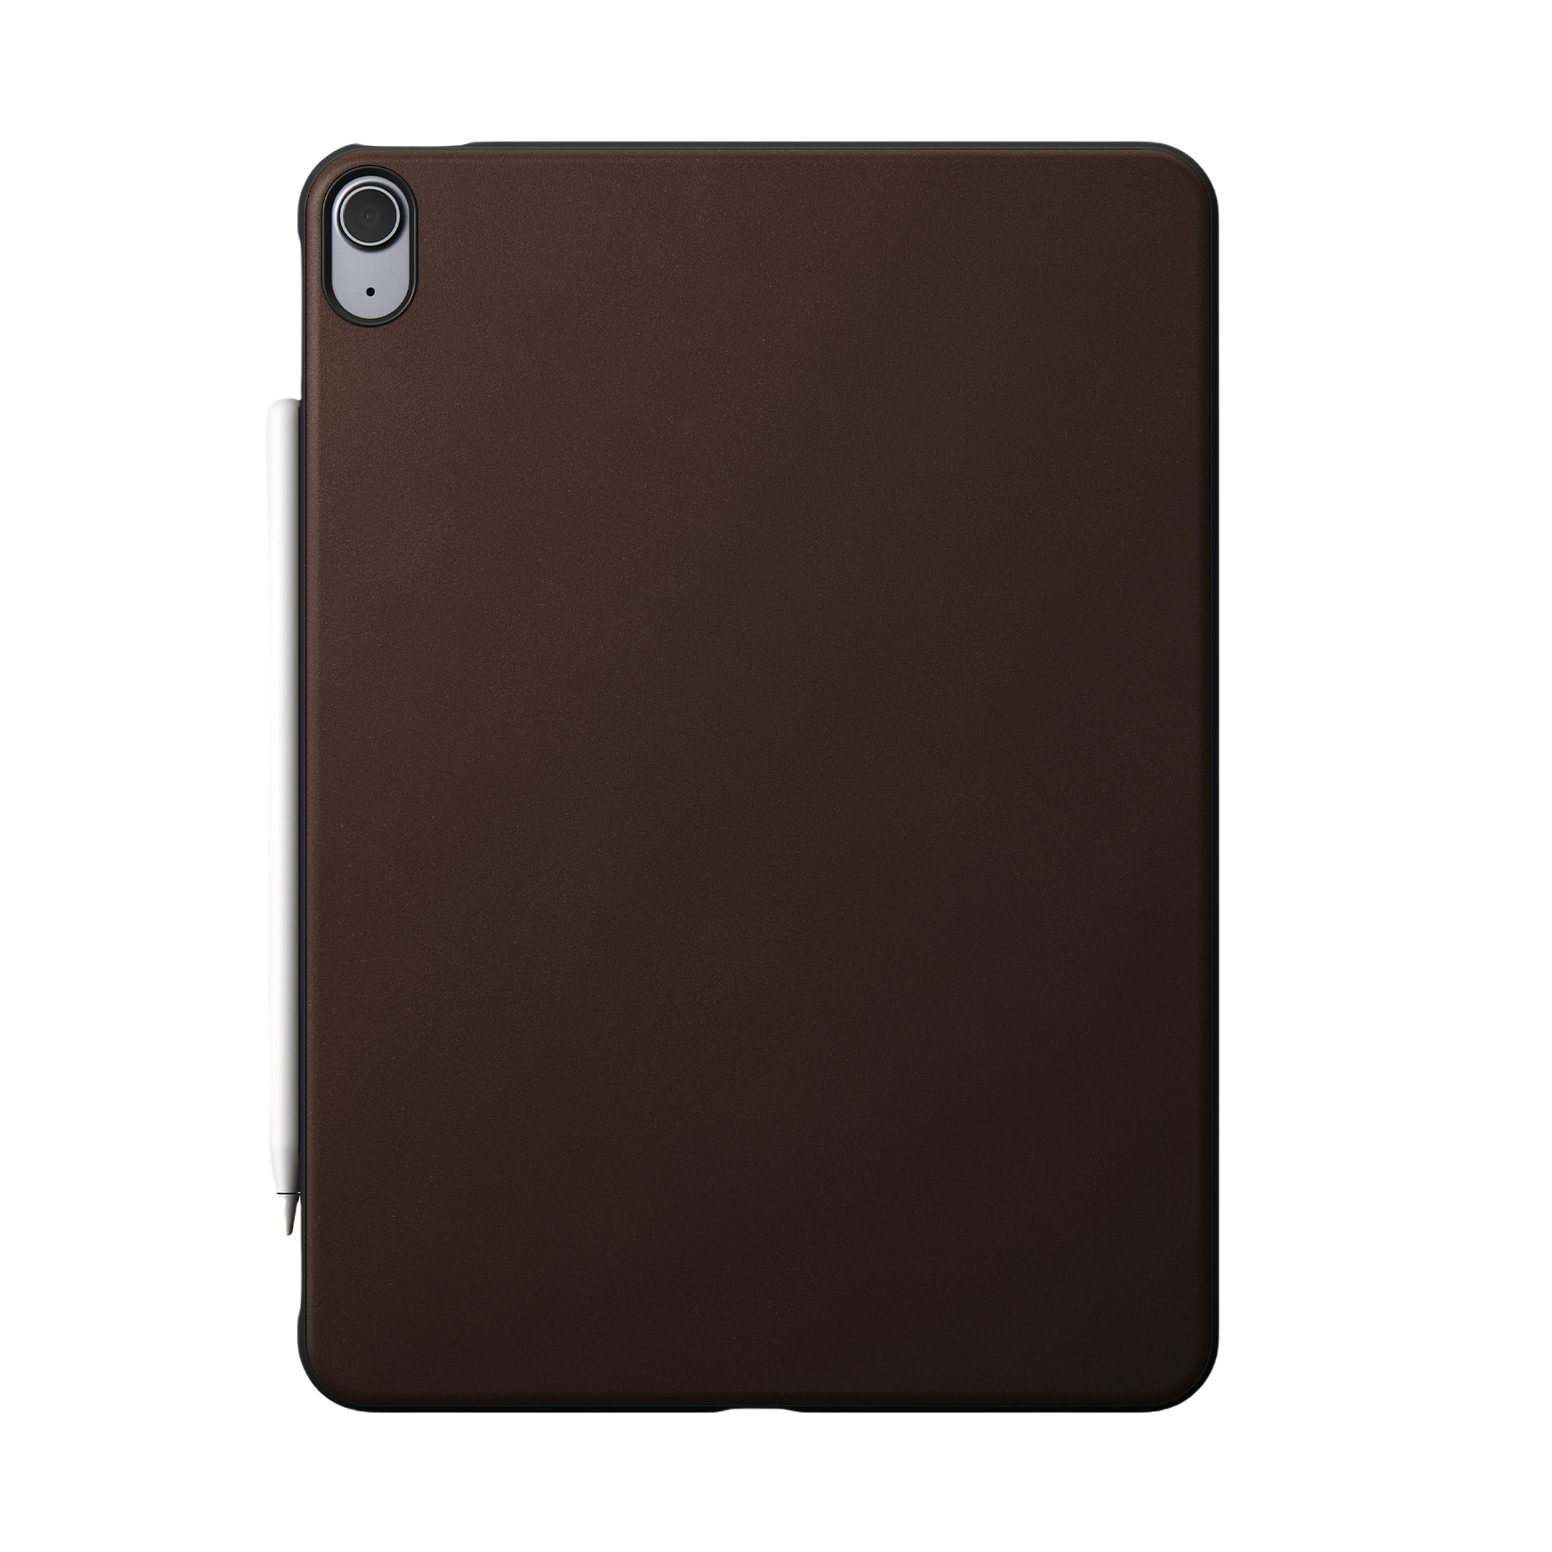 Nomad Modern Leather Case for iPad Air (4th Gen) - Rustic Brown